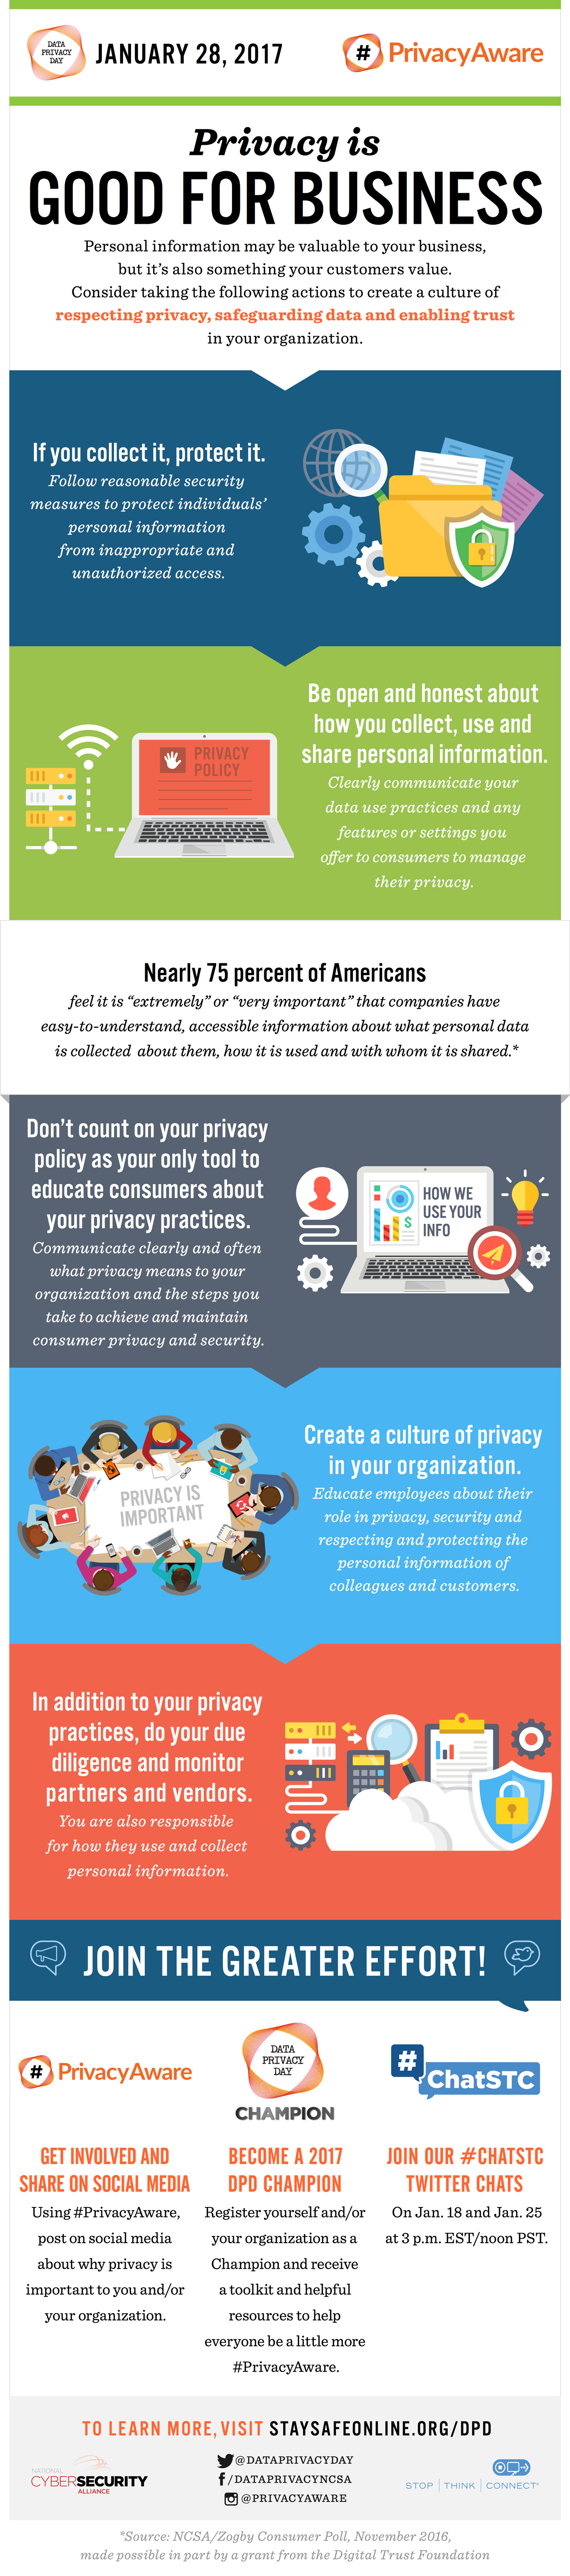 Privacy is Good For Business